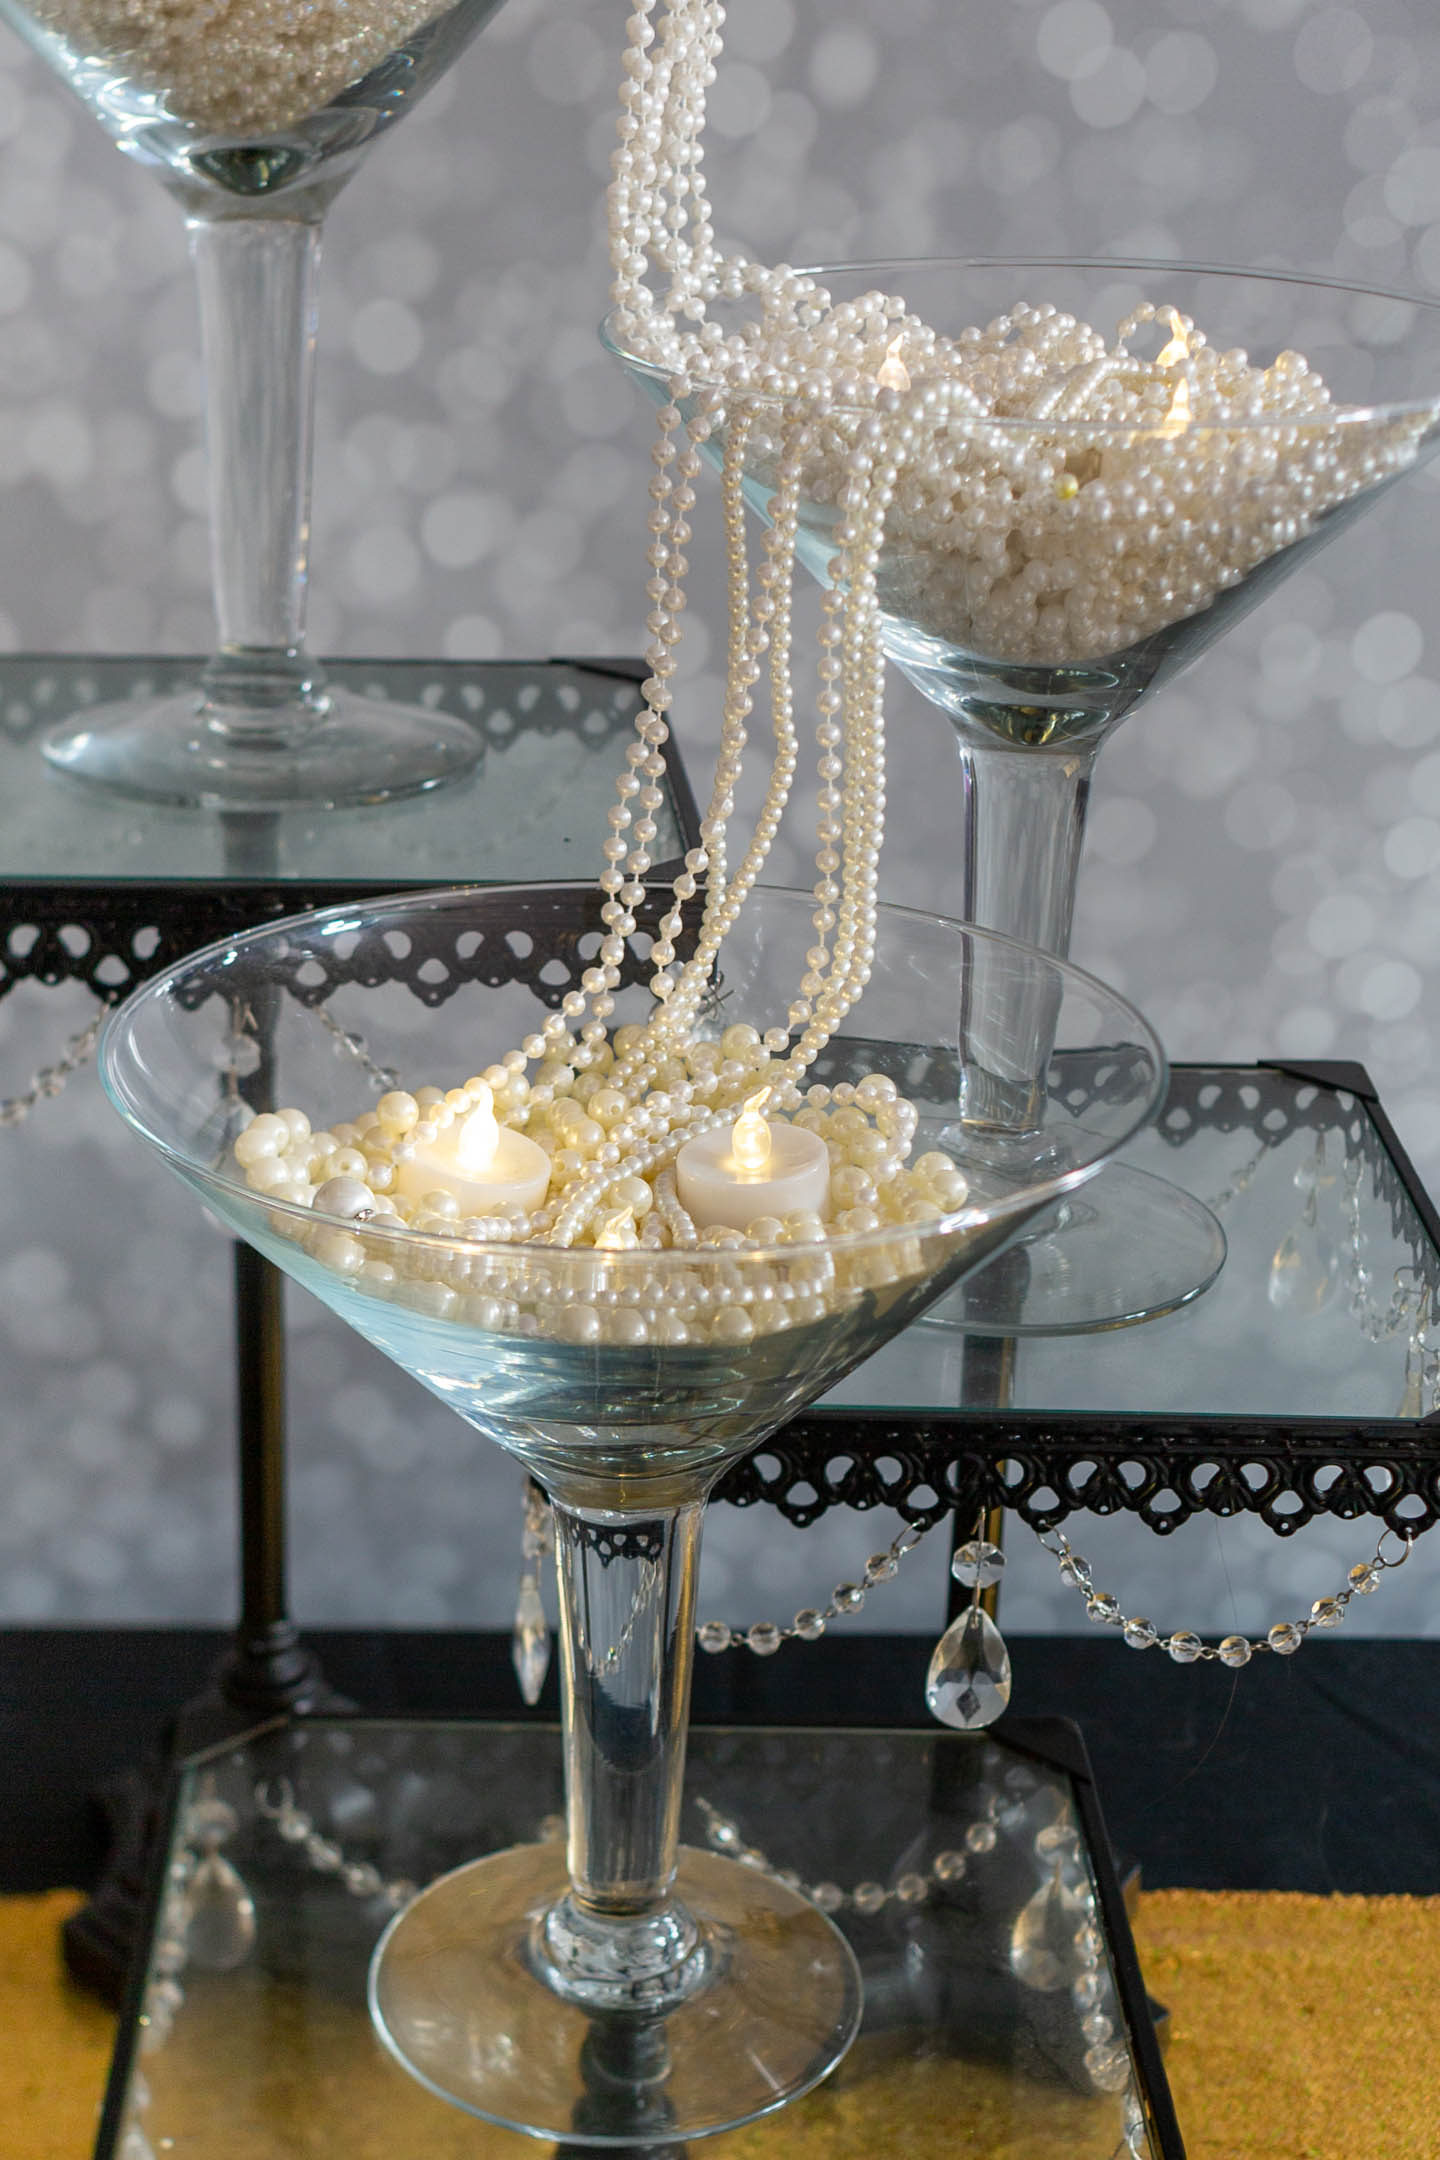 Centerpiece with strings of faux pearls streaming from one large martini glass to another